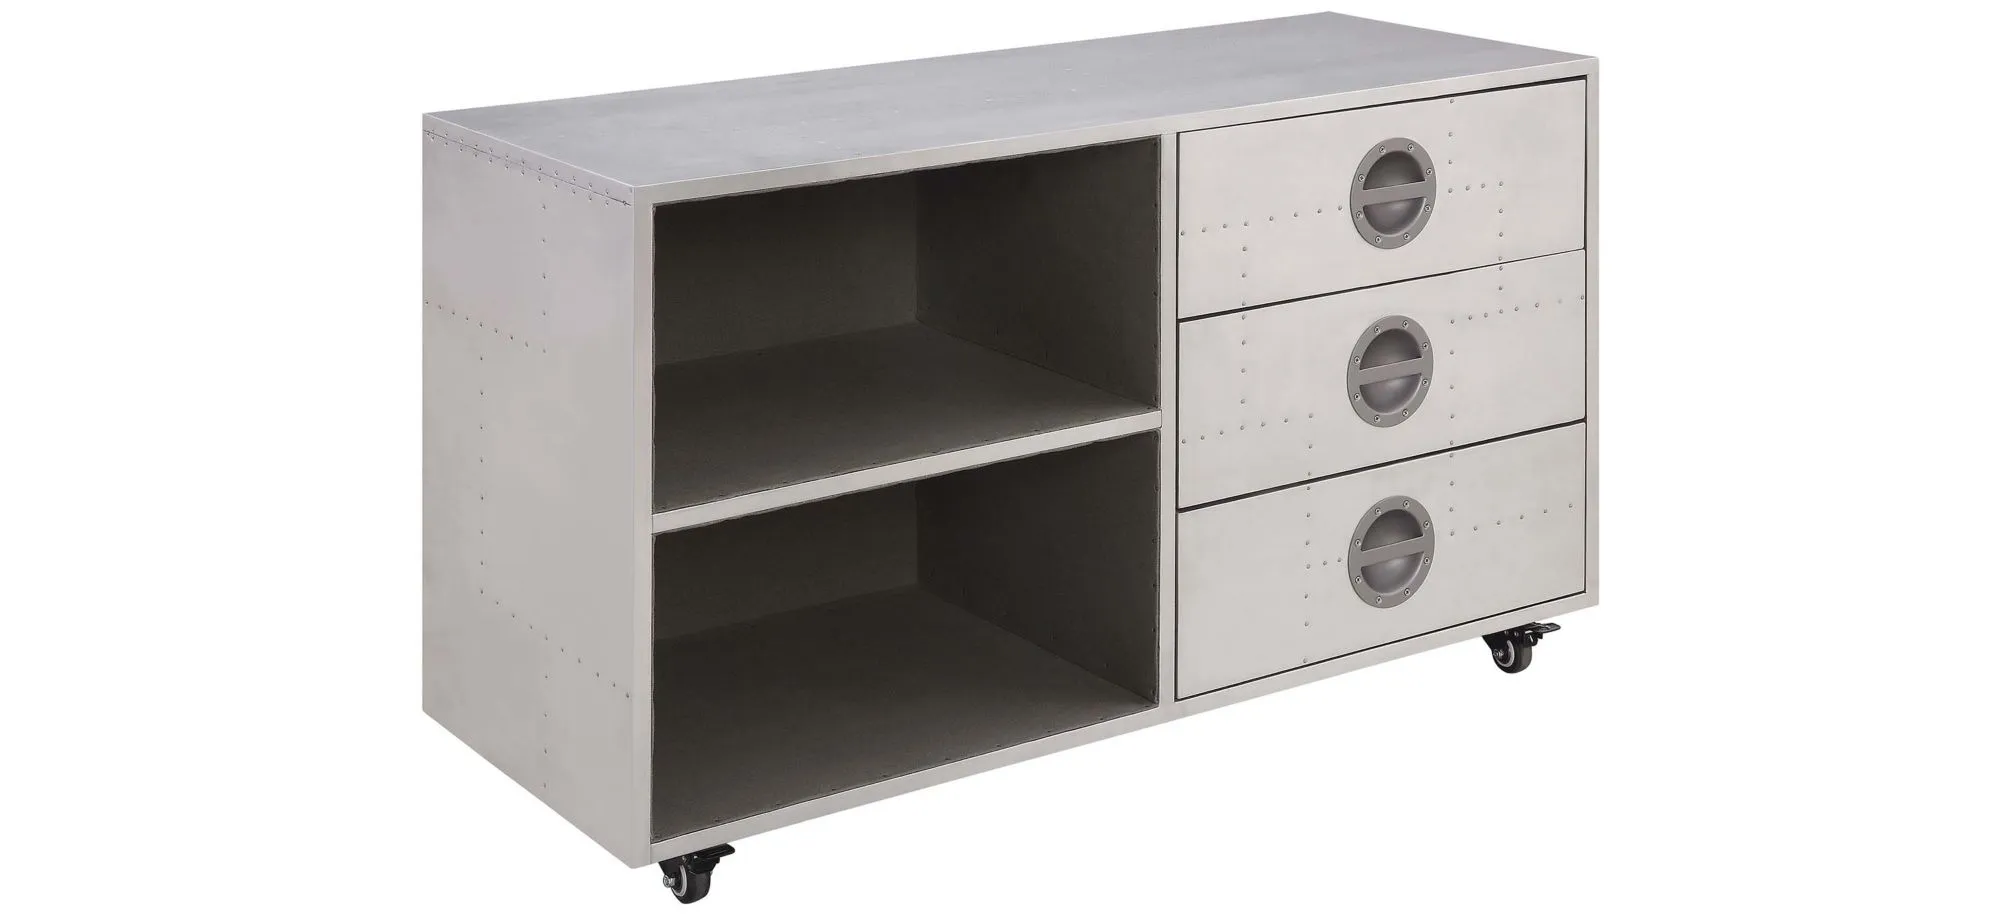 Brancaster Cabinet in Aluminum by Acme Furniture Industry